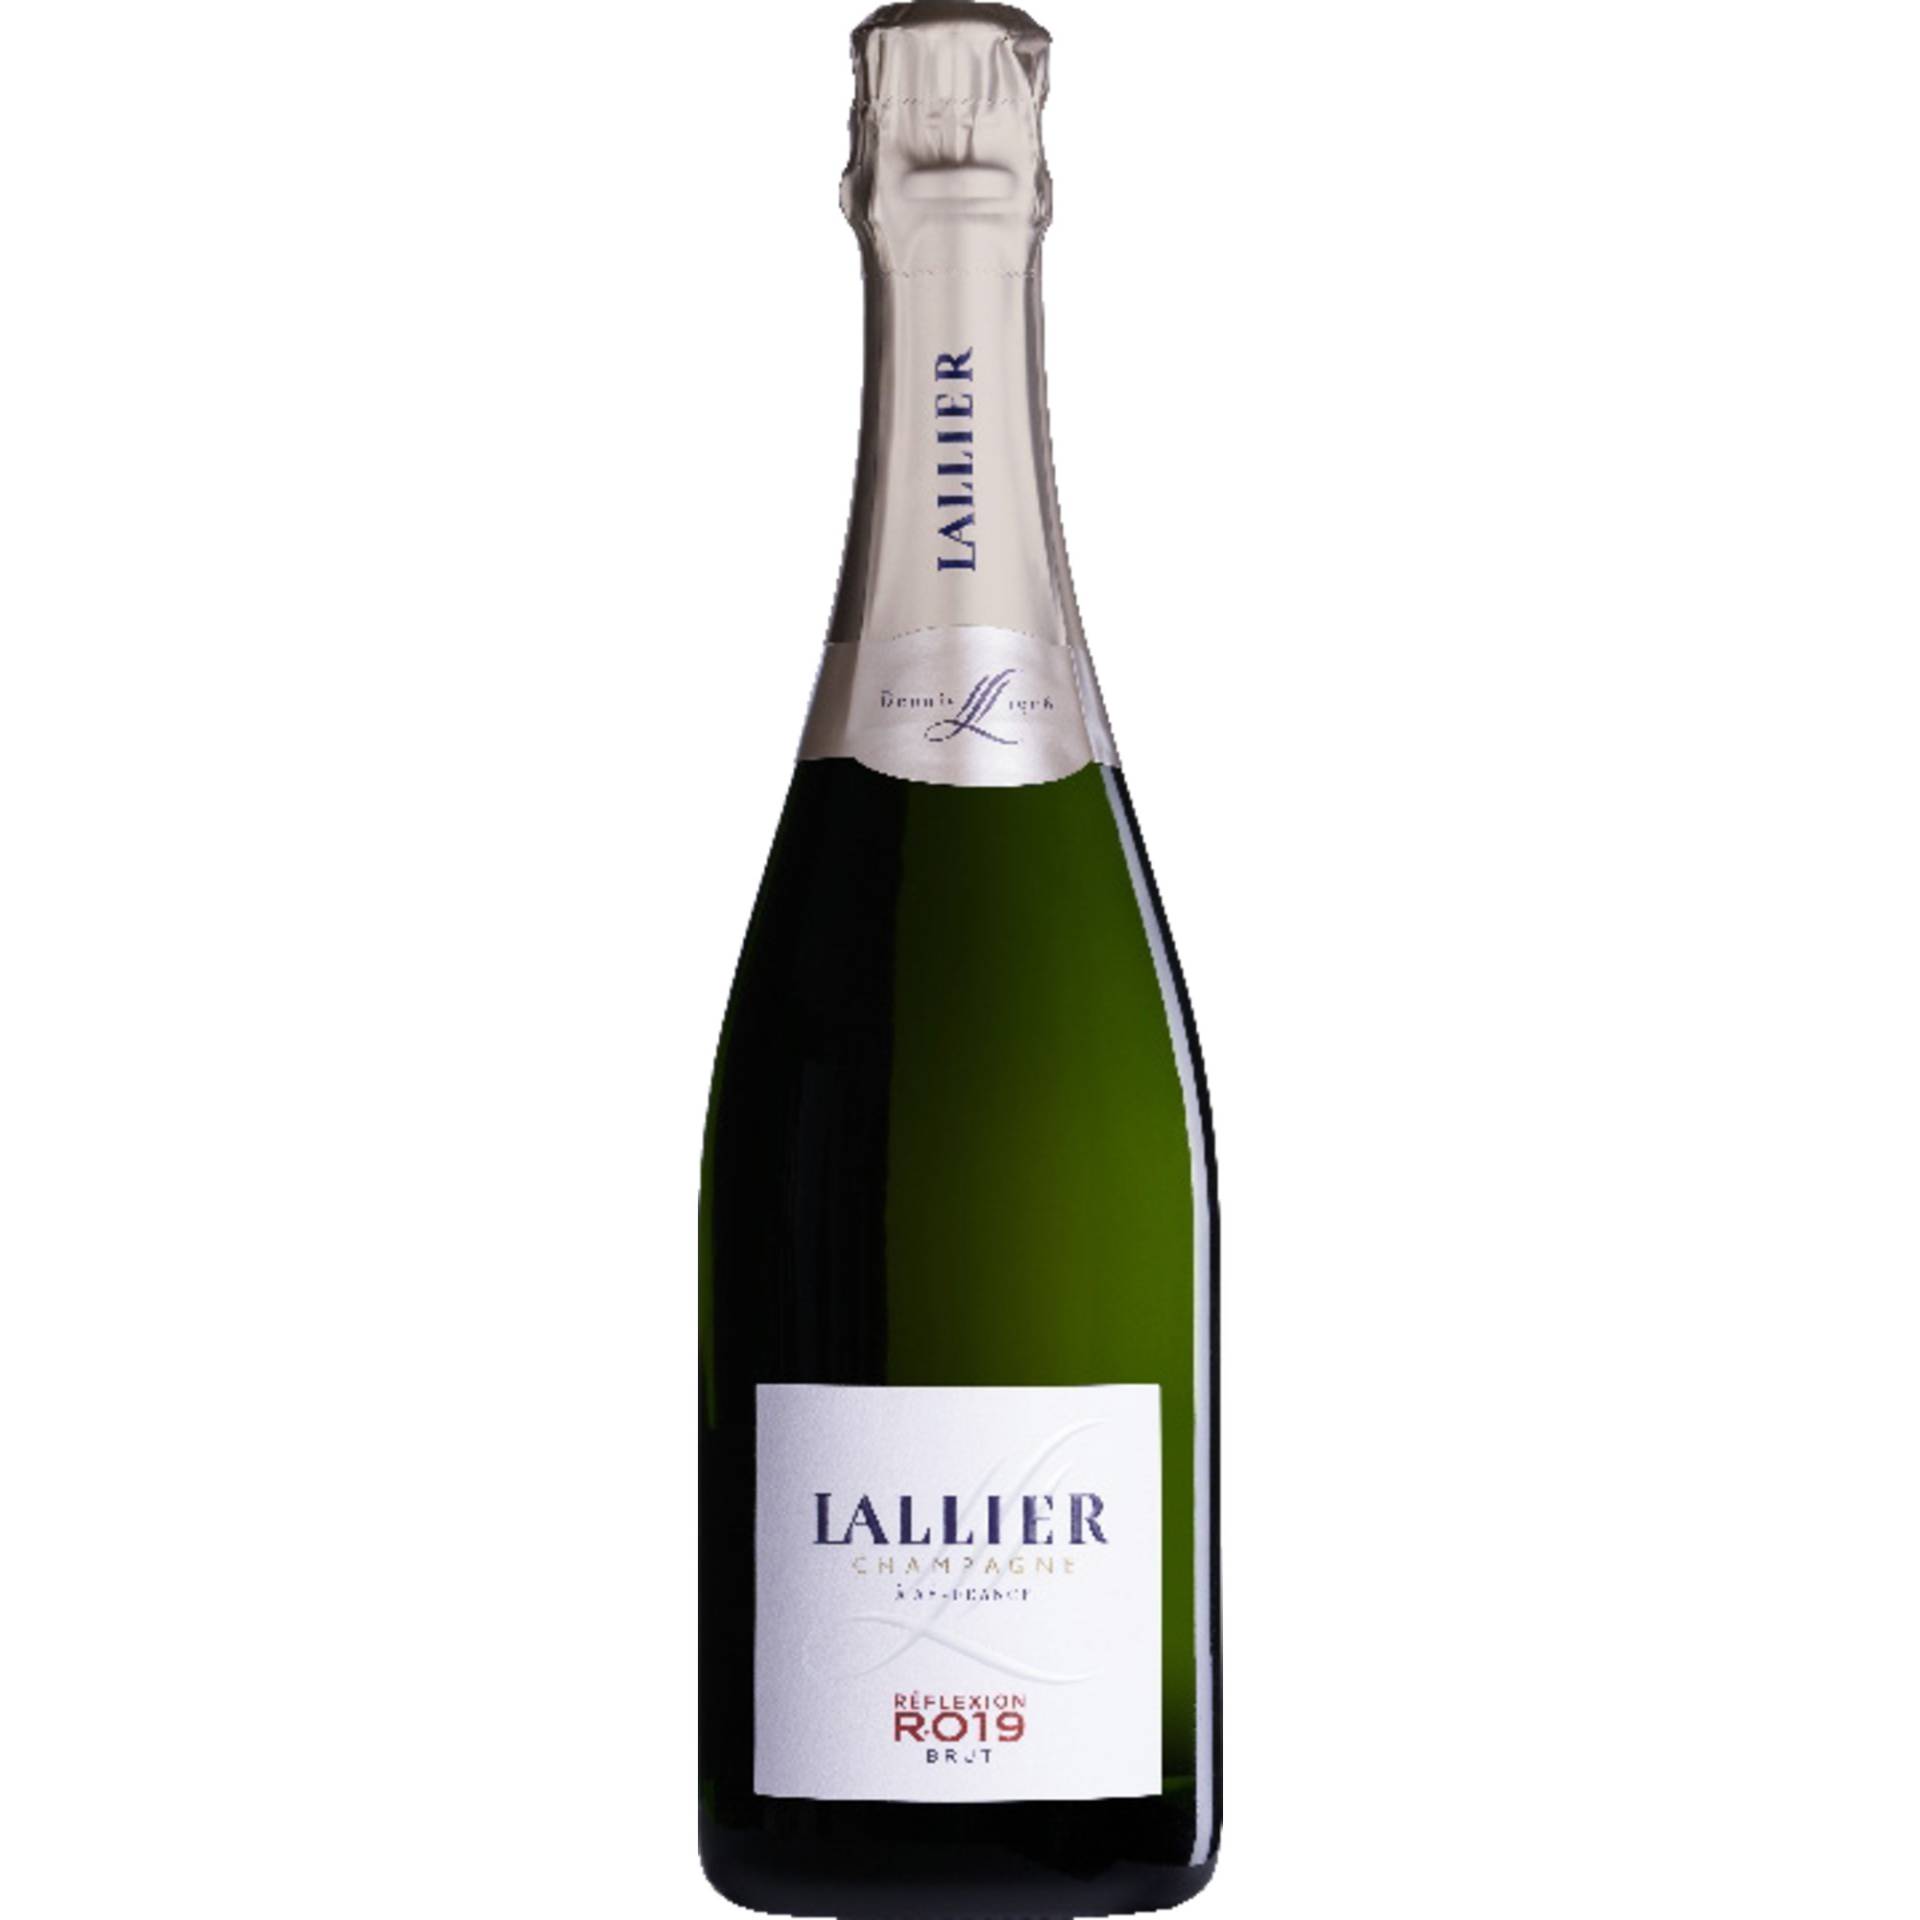 Champagner Lallier Série R019, Brut, Champagne AC, Champagne, Schaumwein von Champagne Lallier, 51160 Ay, France